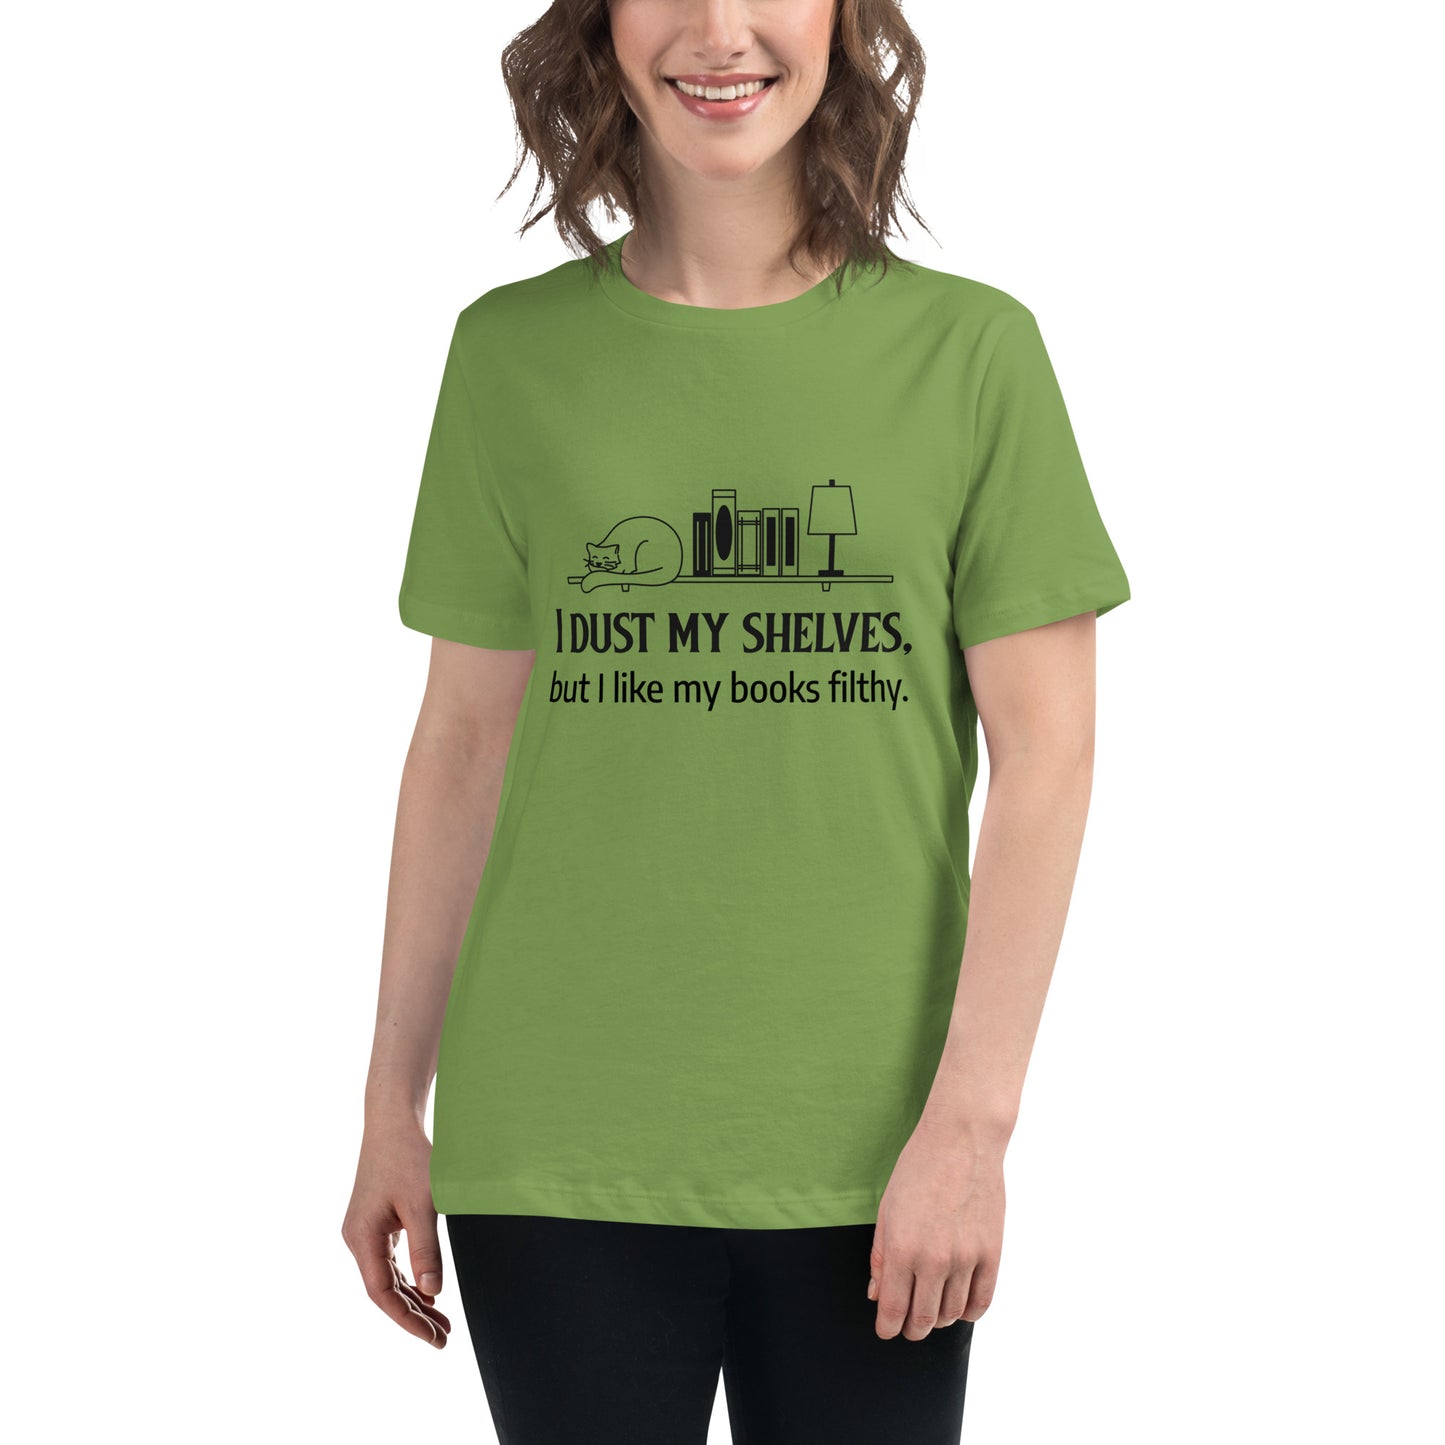 Women's Relaxed T-Shirt I dust my shelves, but I like my books filthy